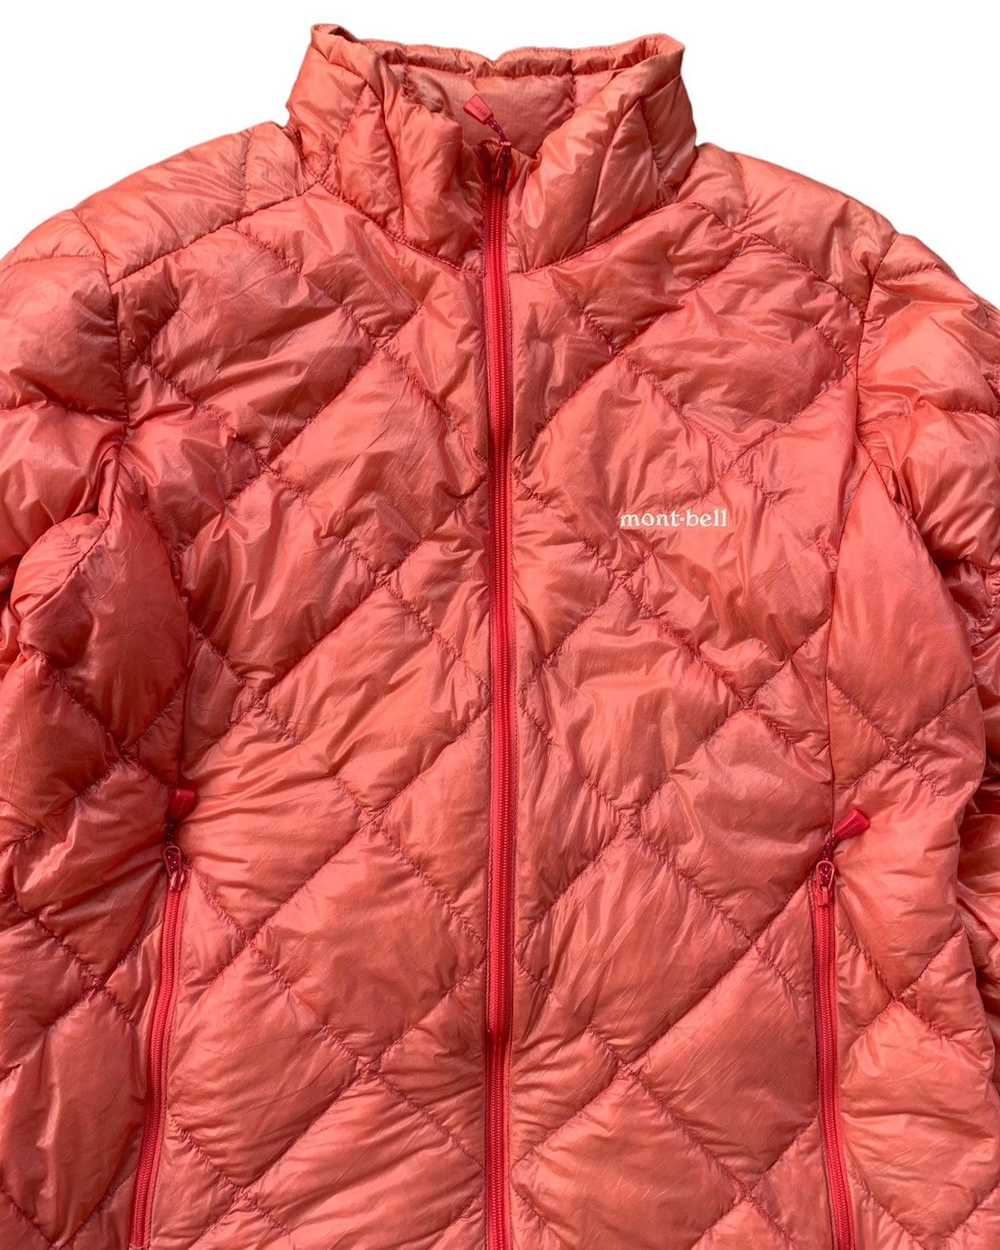 Montbell 2000s Diamond Lightweight Down Jacket - image 3